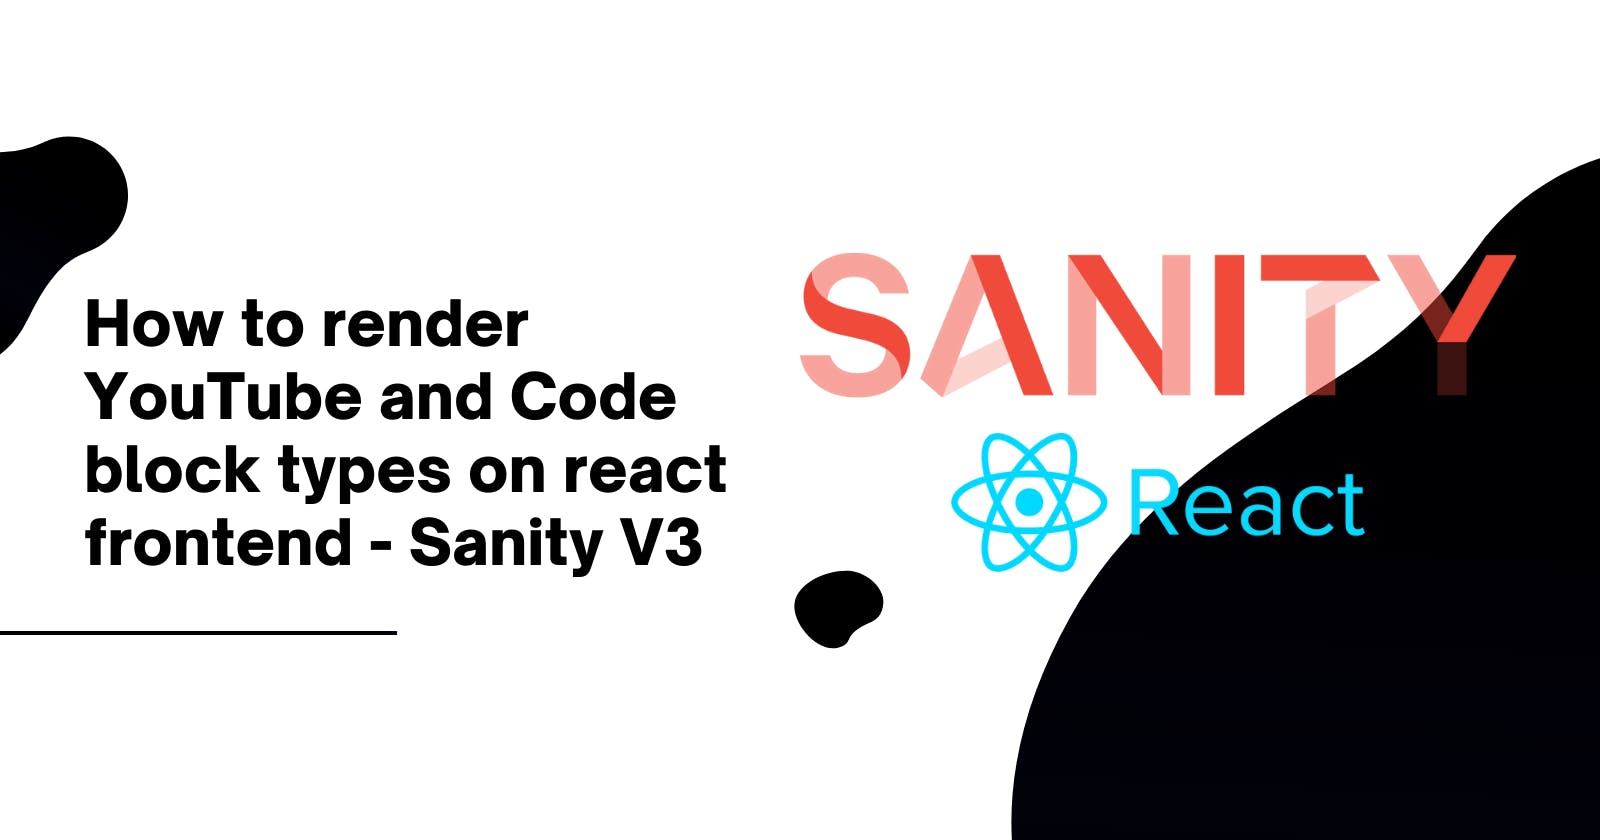 How to render Youube and code block types on react frontend - Sanity V3